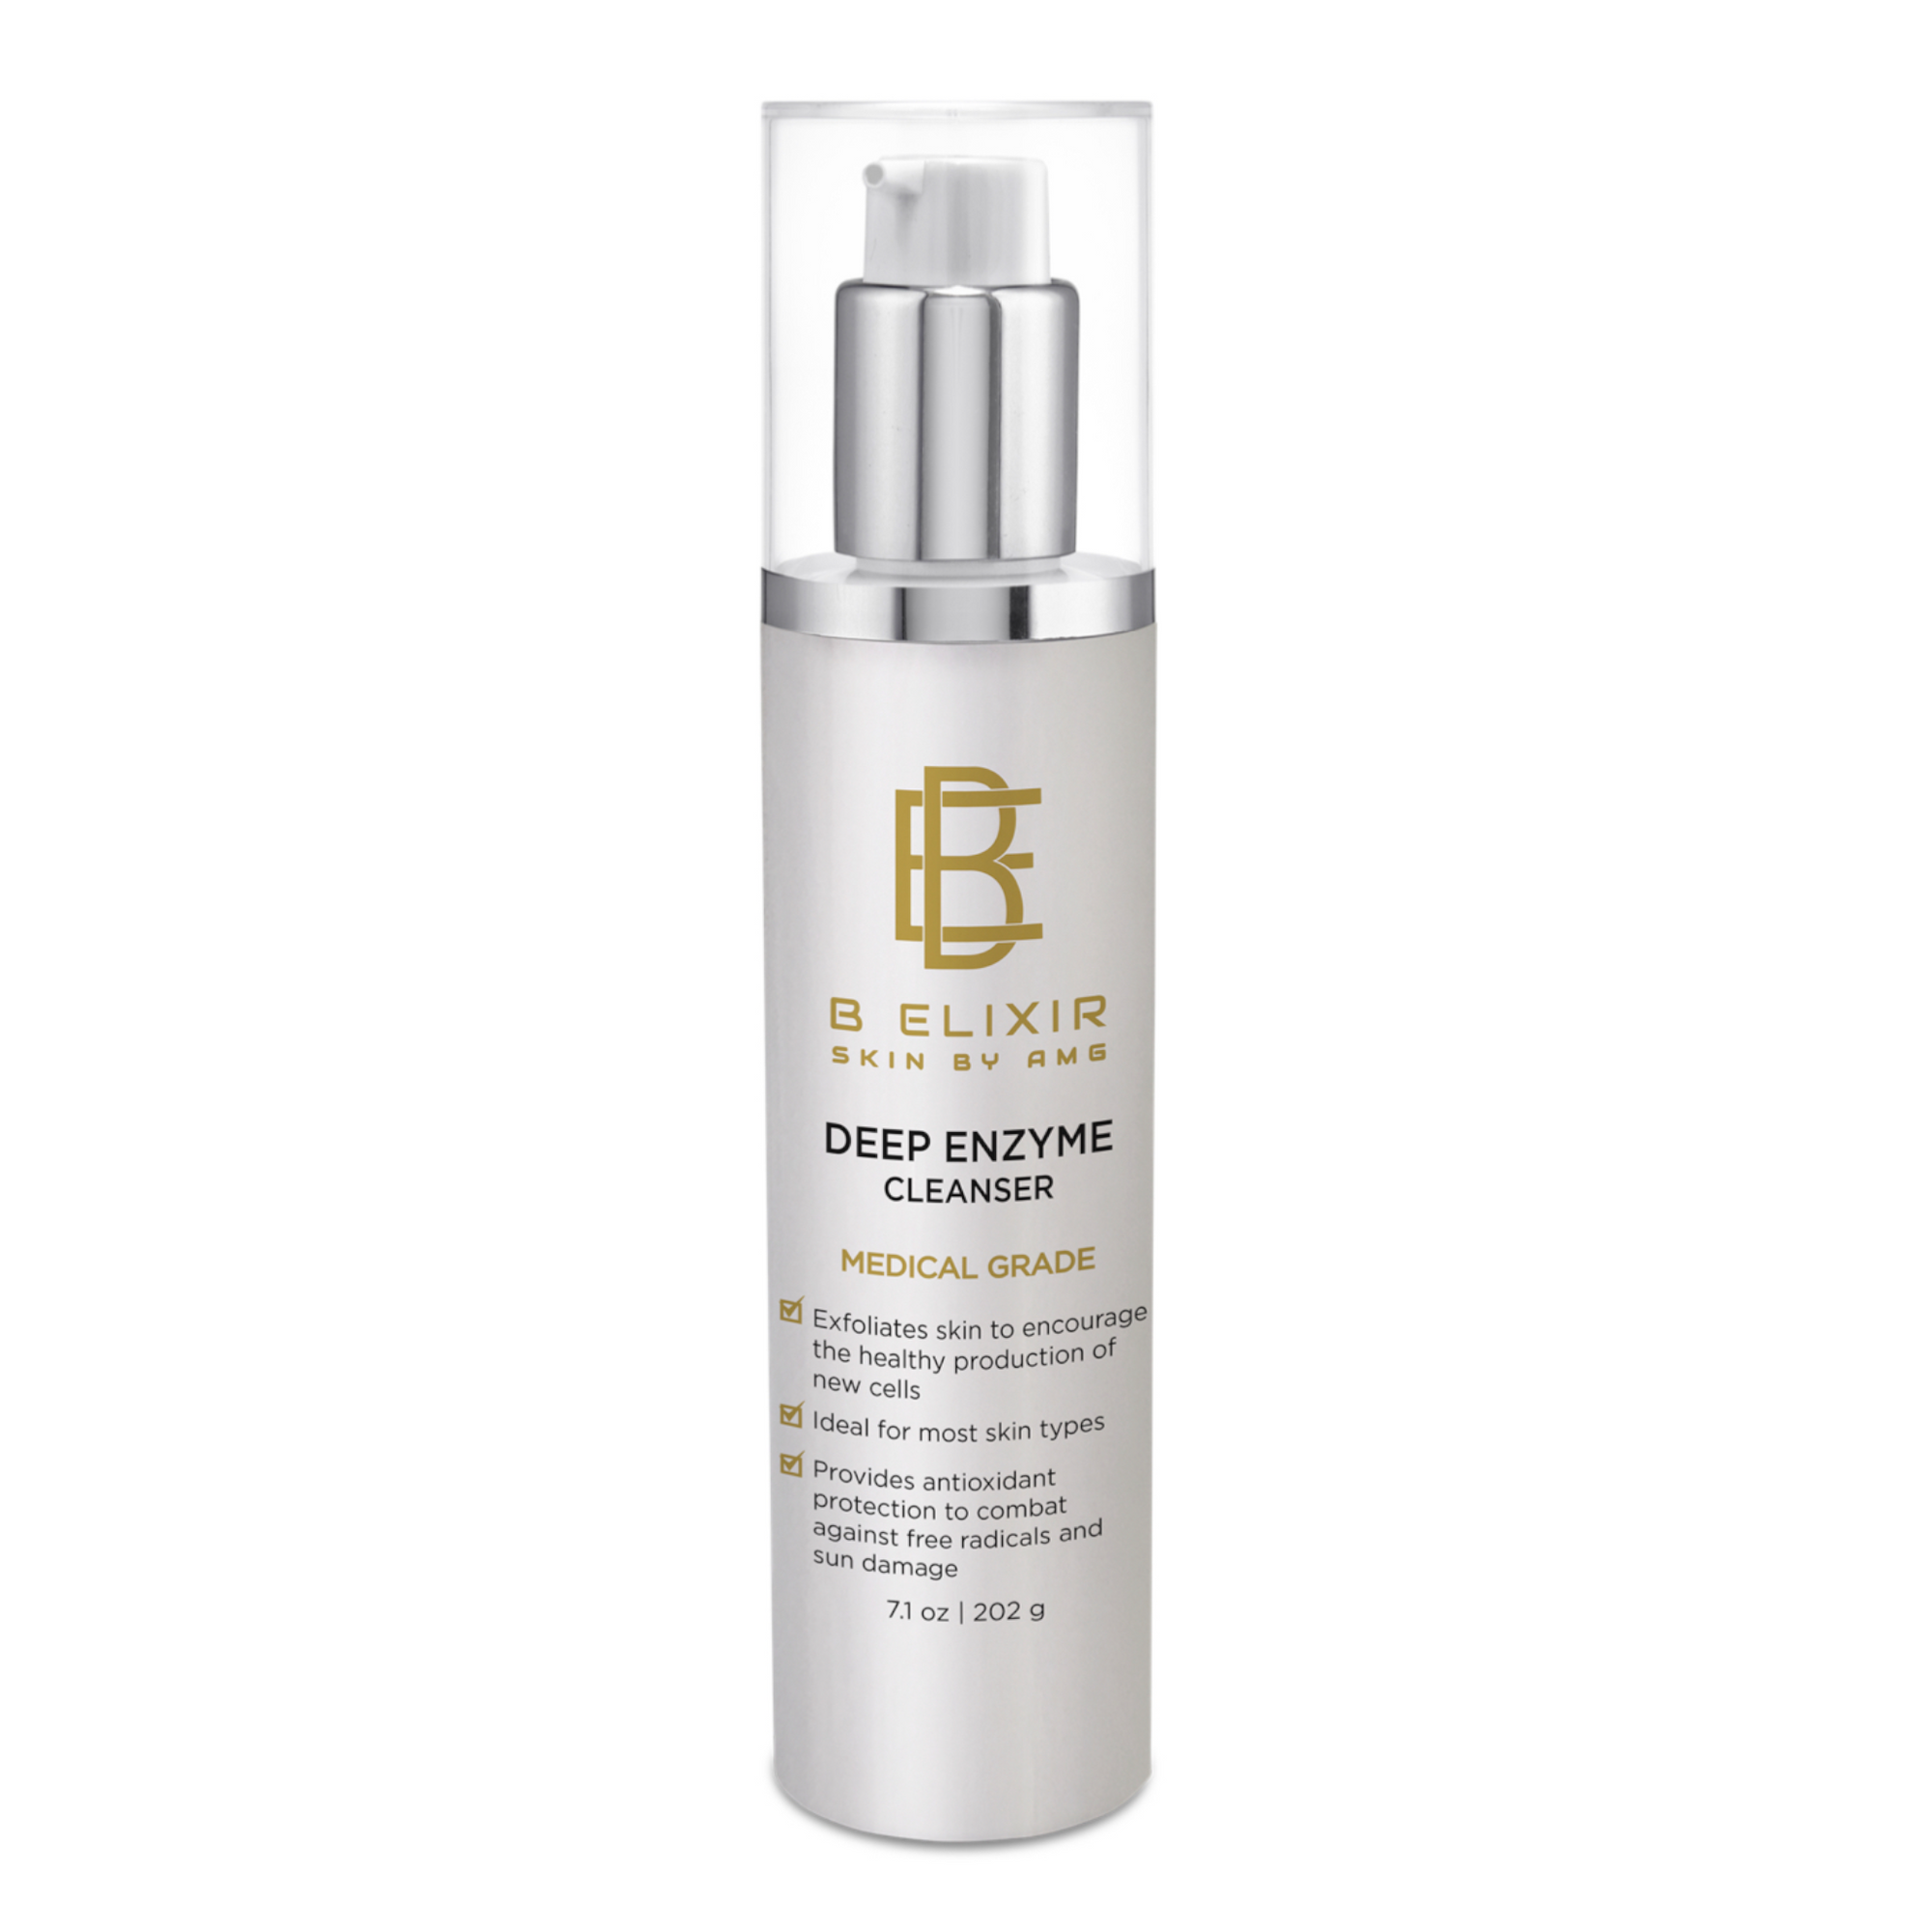 Deep Enzyme Cleanser